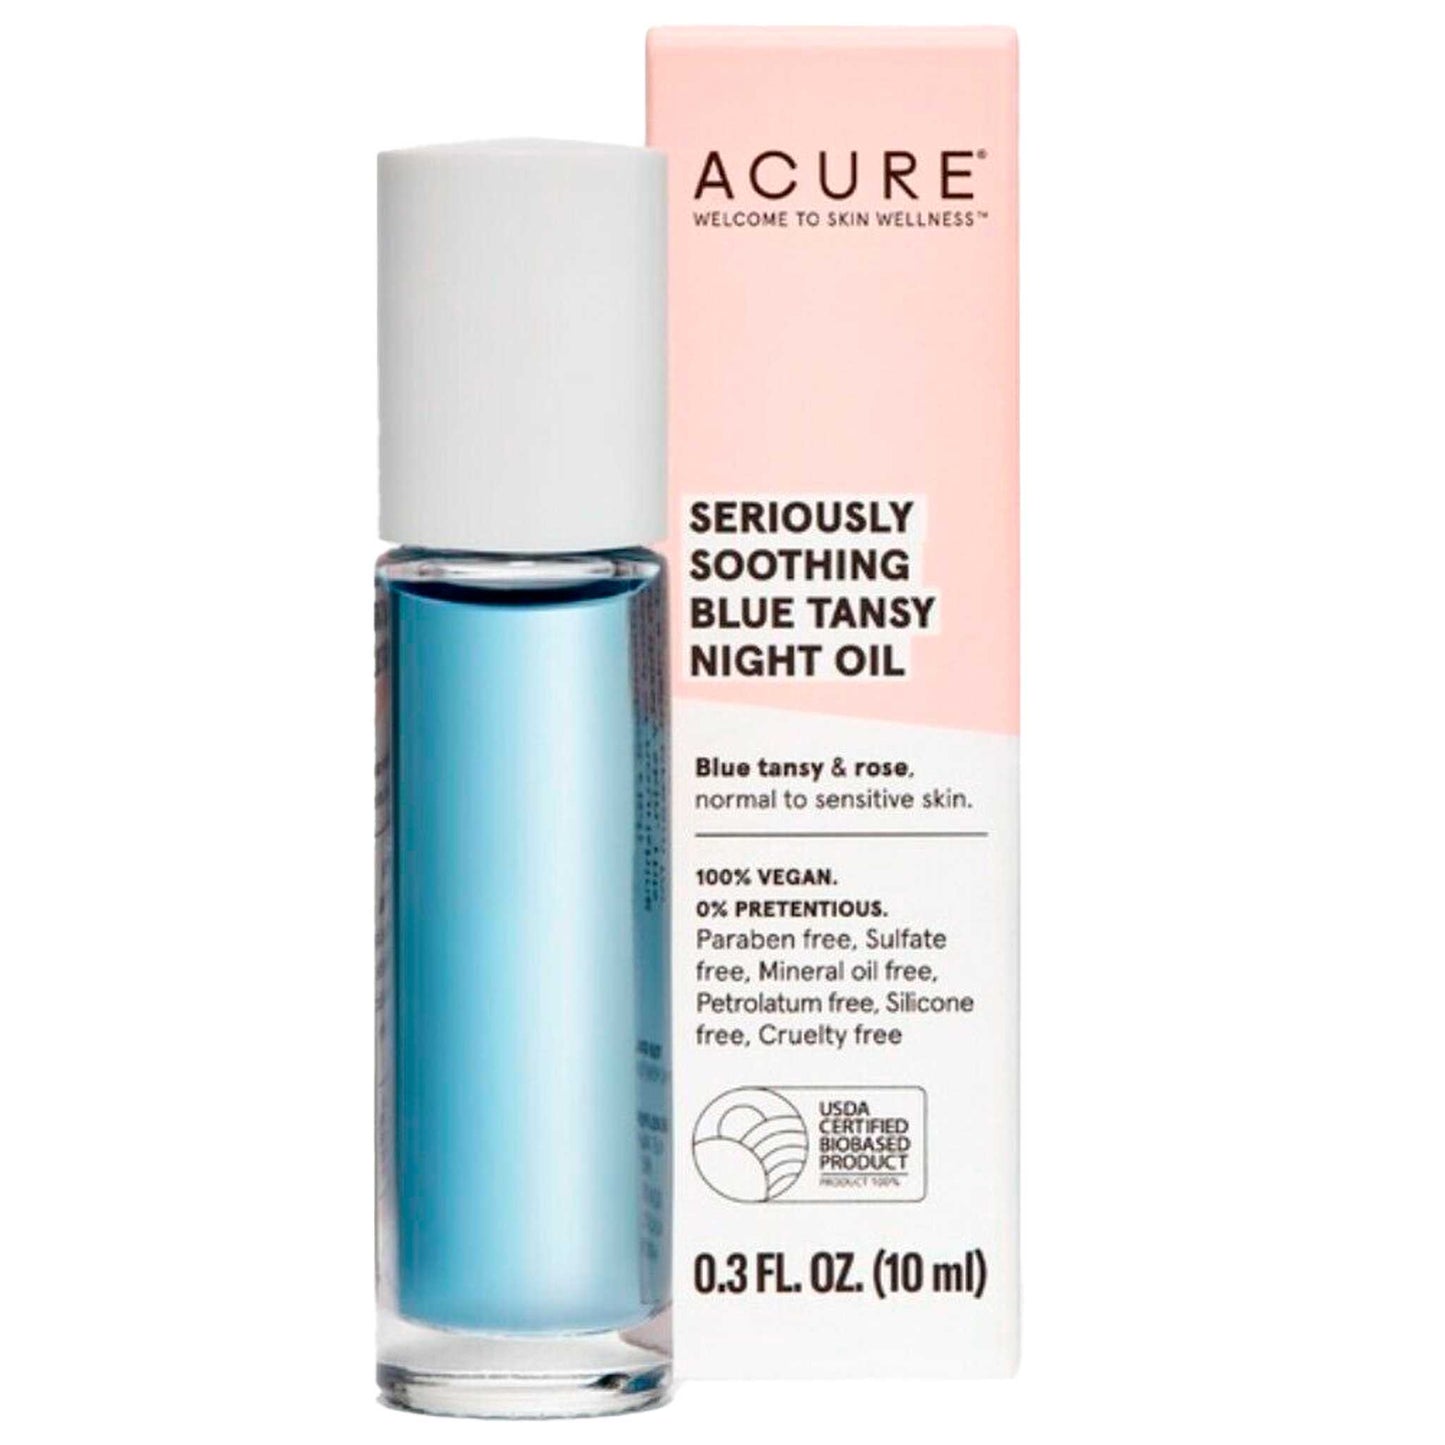 ACURE SOOTHING BLUE TANSY NIGHT OIL 10 ML Acure